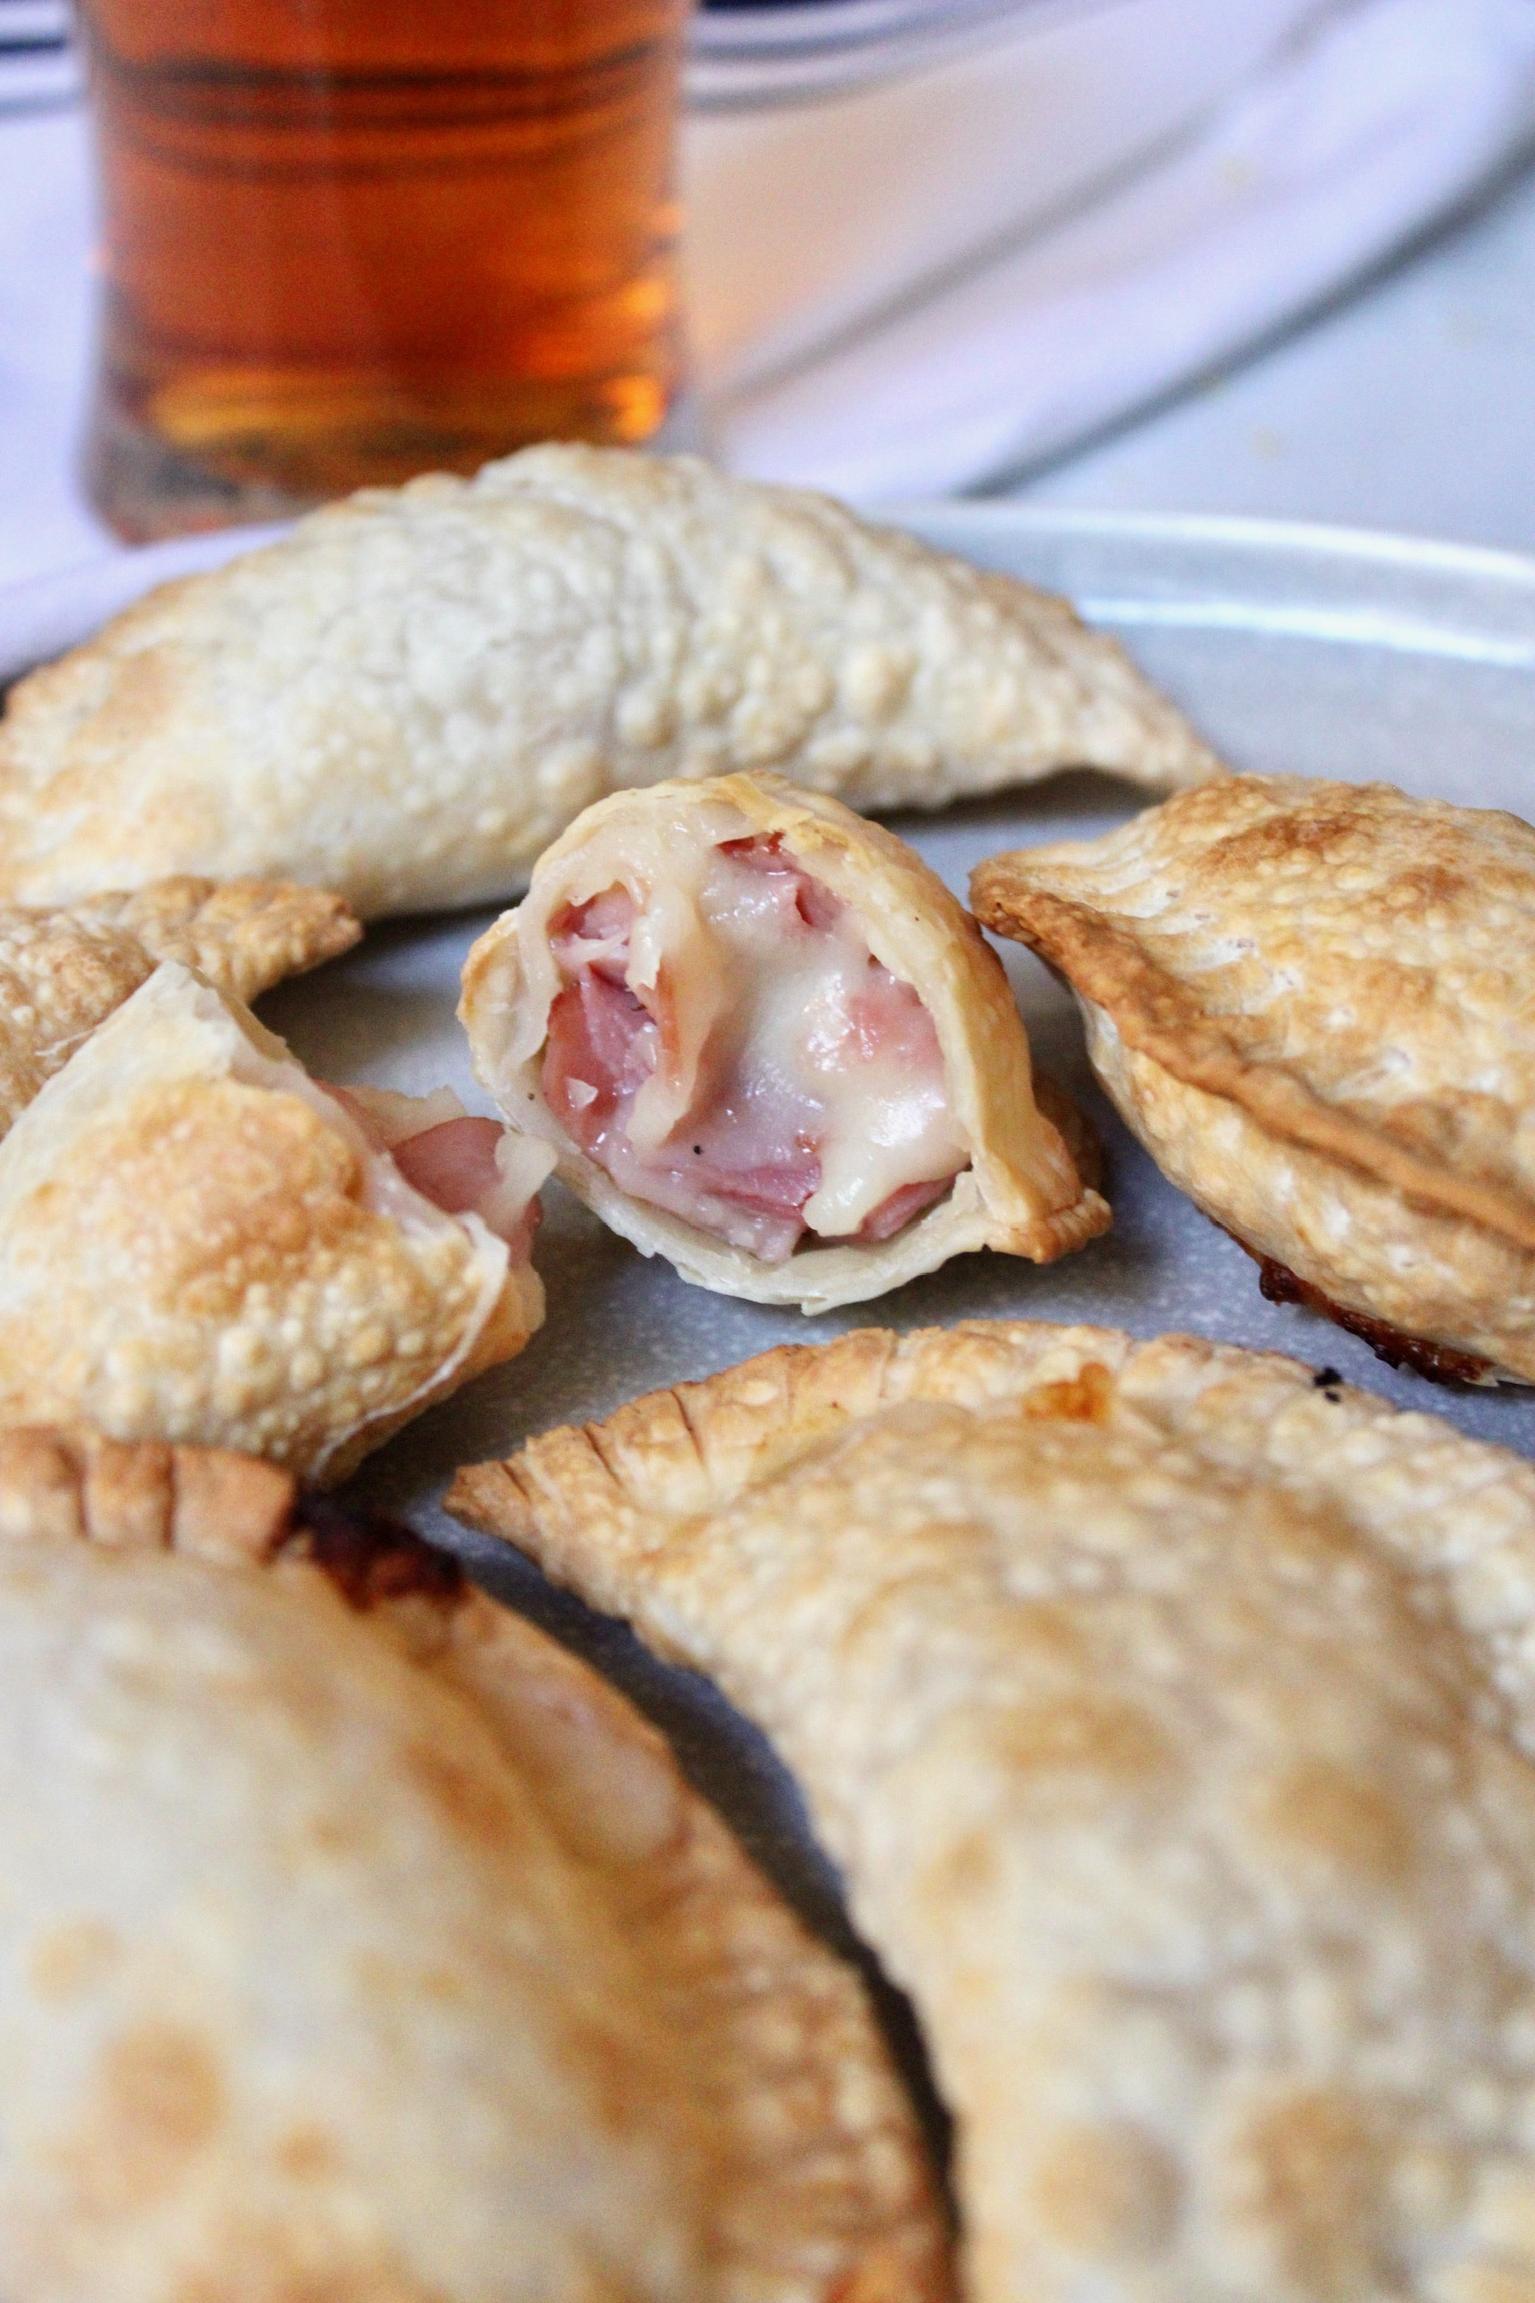  One bite of these empanadas and you'll be transported to the streets of Brazil.